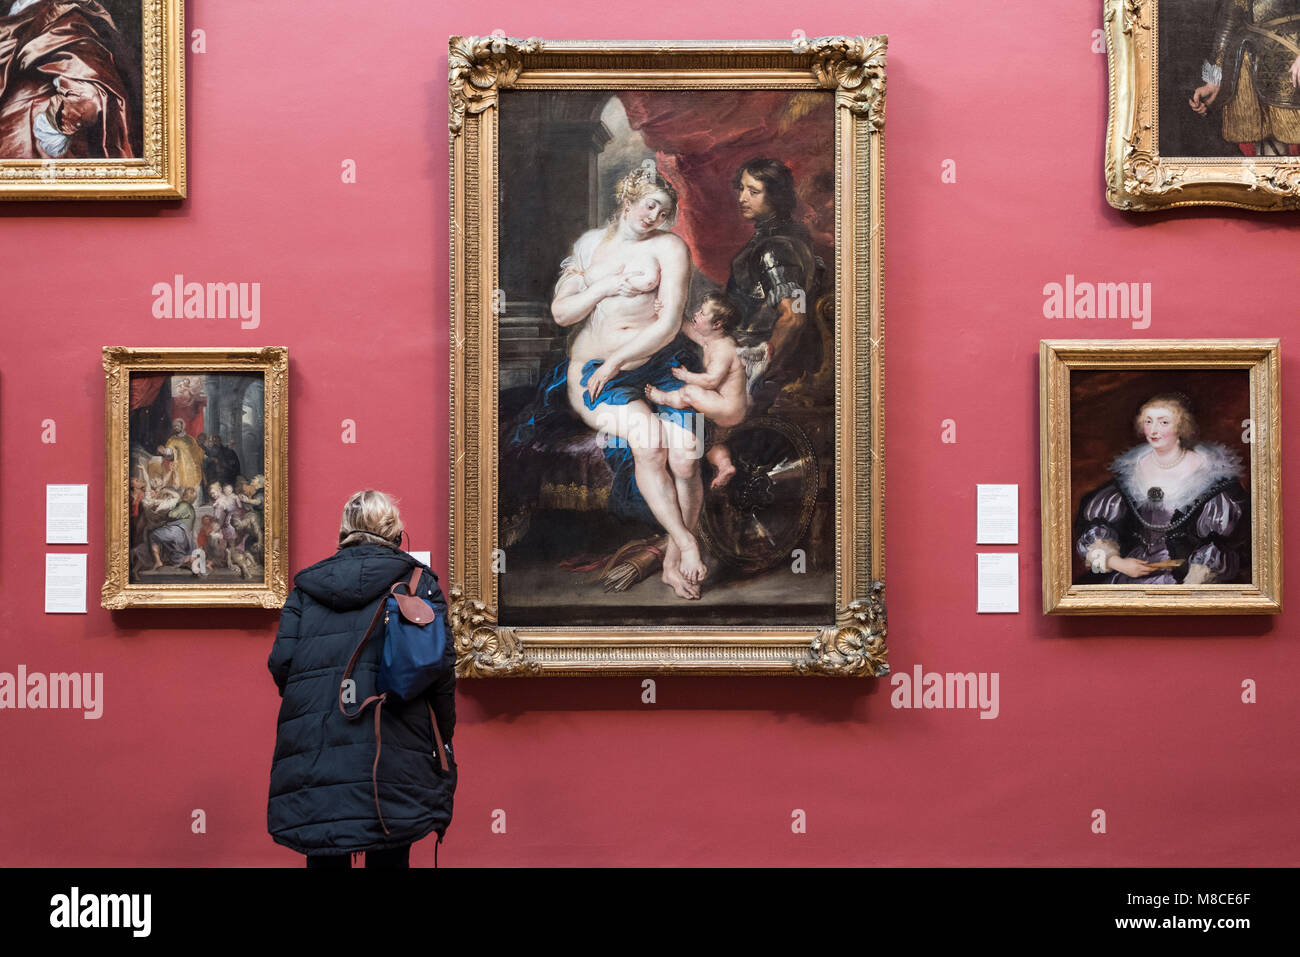 London. England. UK. Dulwich Picture Gallery, visitor looking at Peter Paul Rubens' 'Venus, Mars and Cupid' ca. 1635. Stock Photo